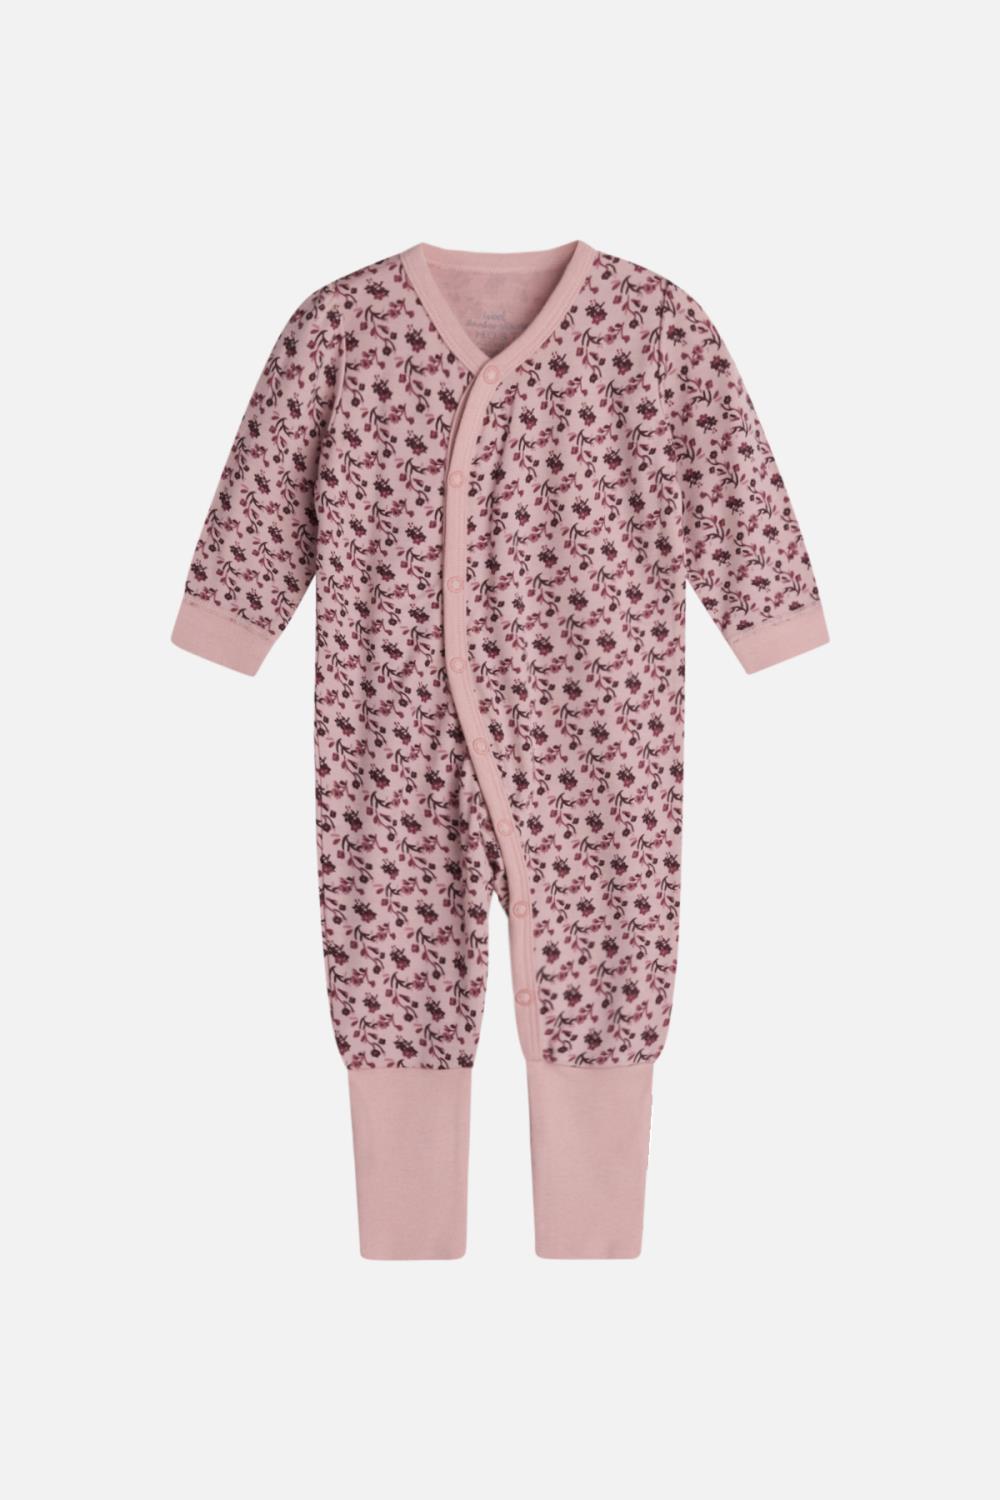 Hust&Claire Manui Heldress Blomster, Ull/Bambus - Dusty Rose